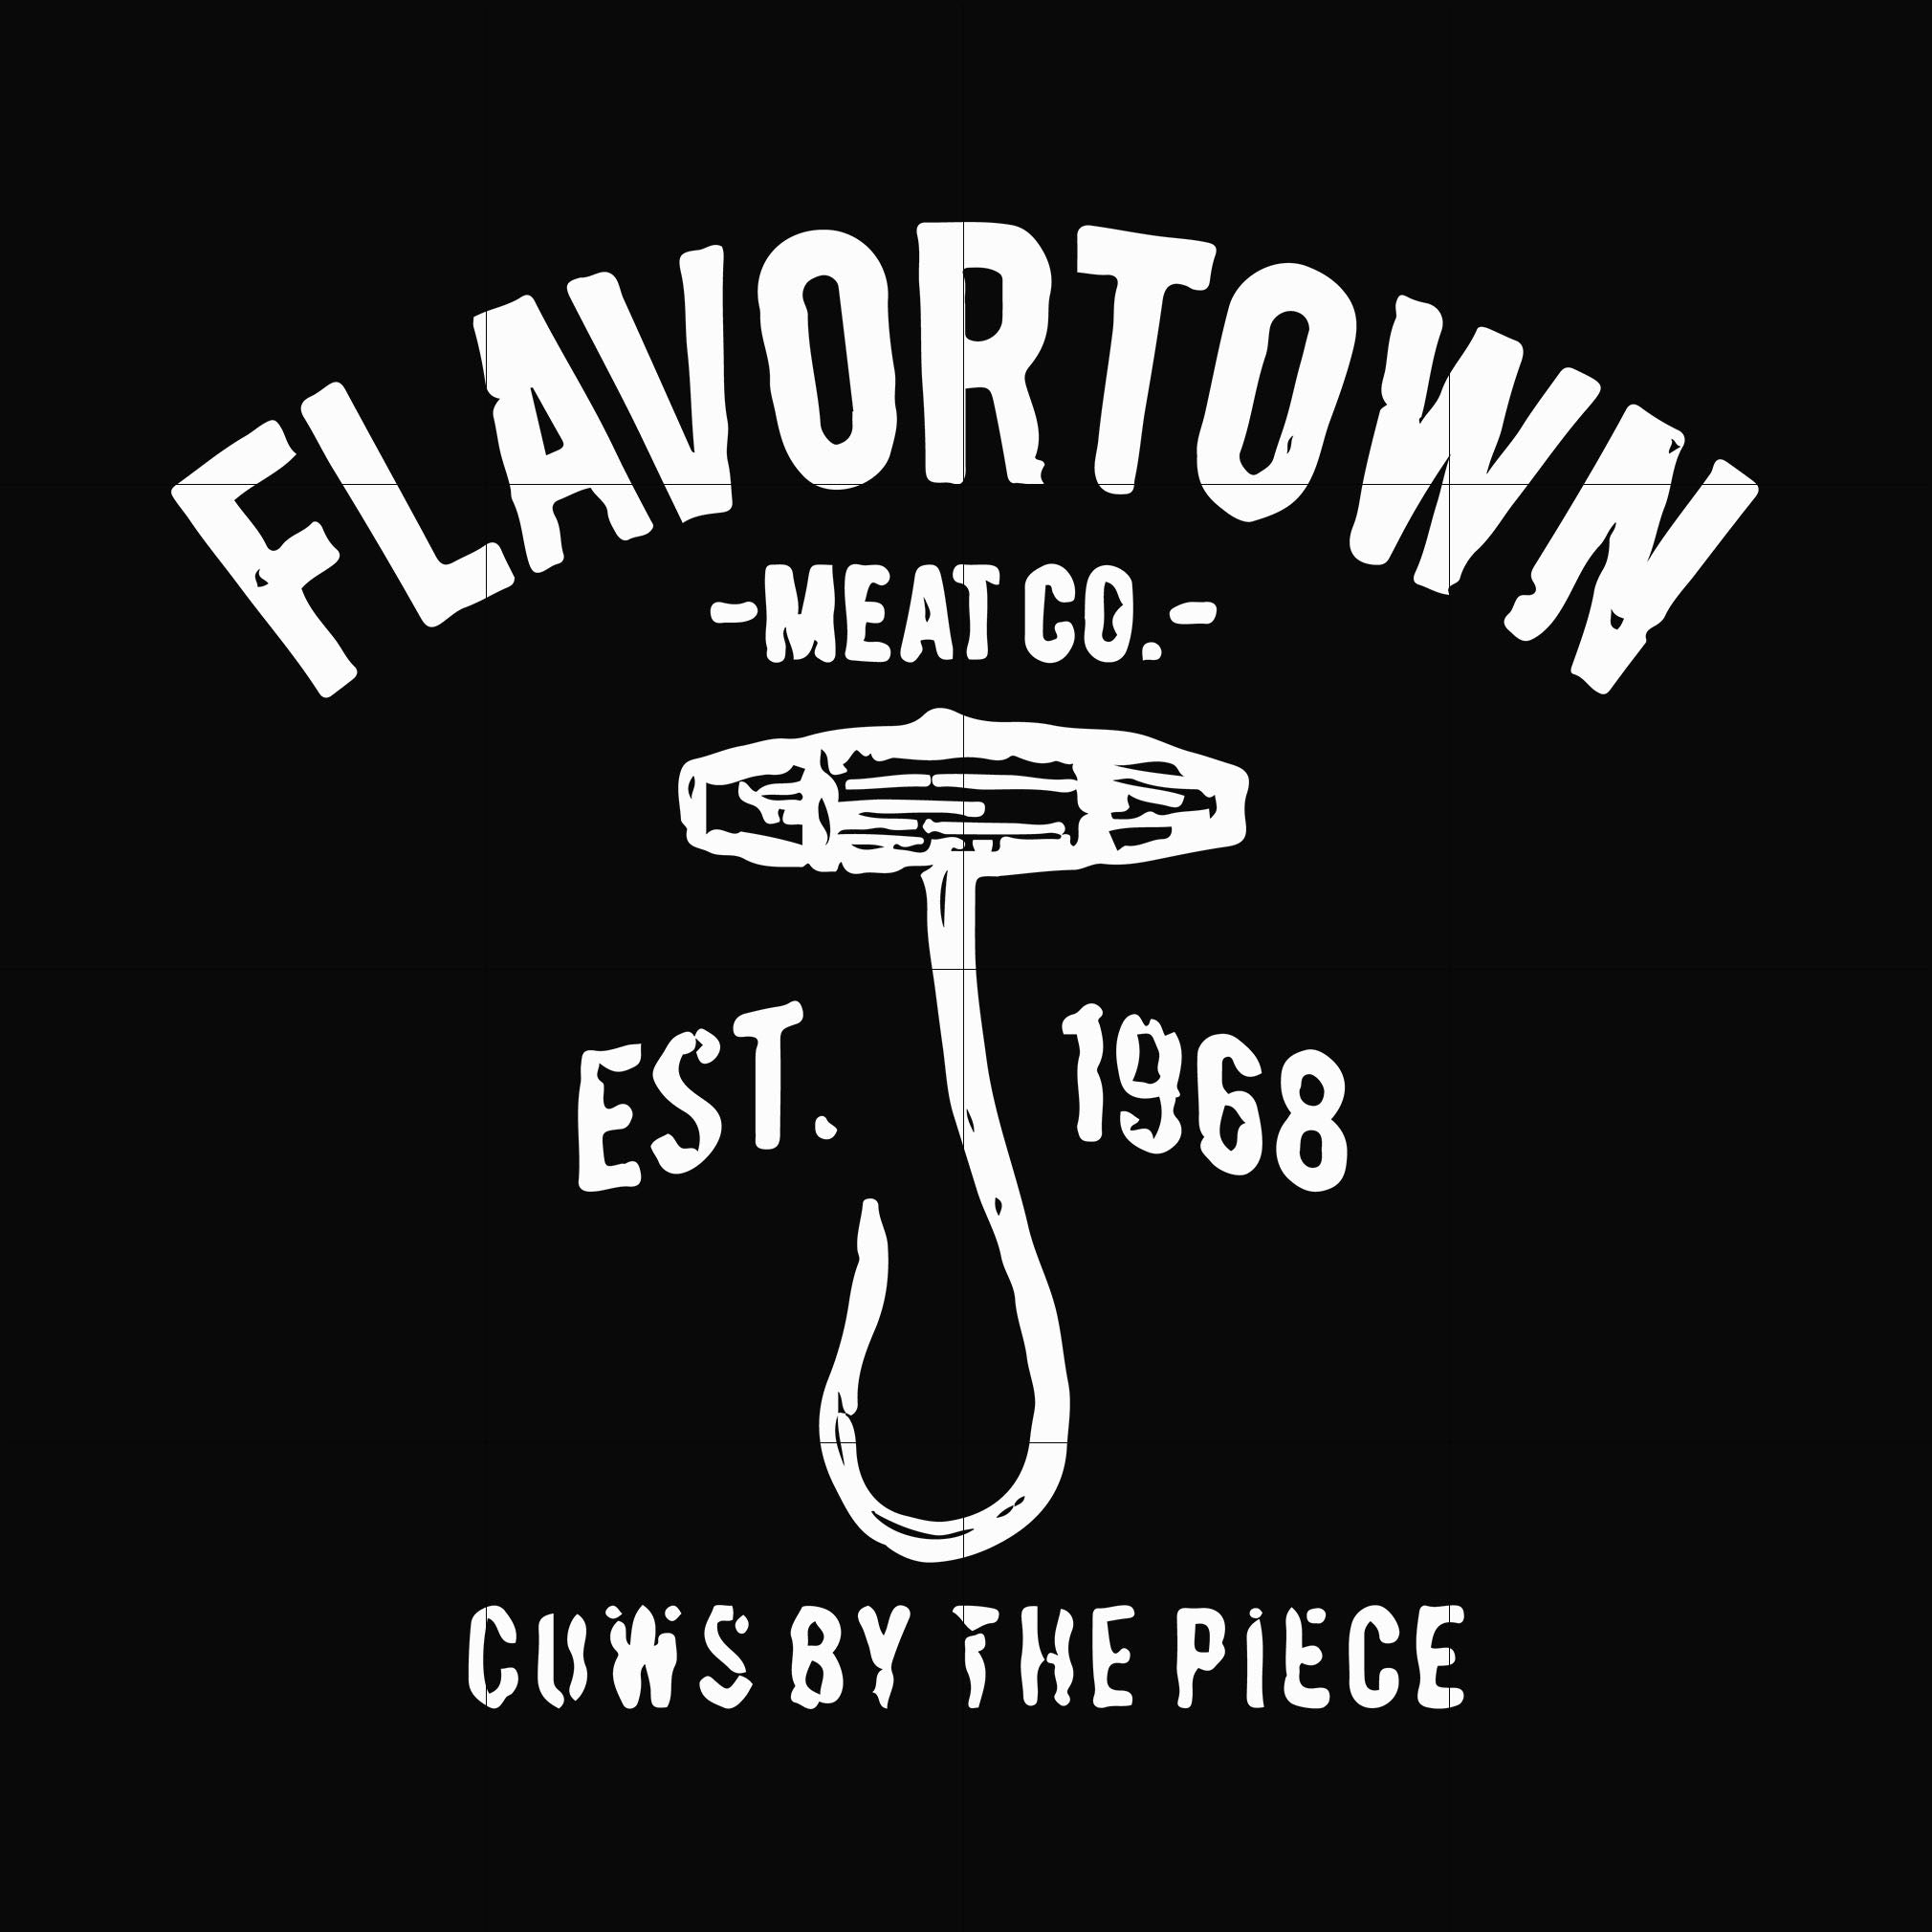 flavortown meat co. est 1968 cows by the piece svg, png, dxf, eps digital file OTH0027